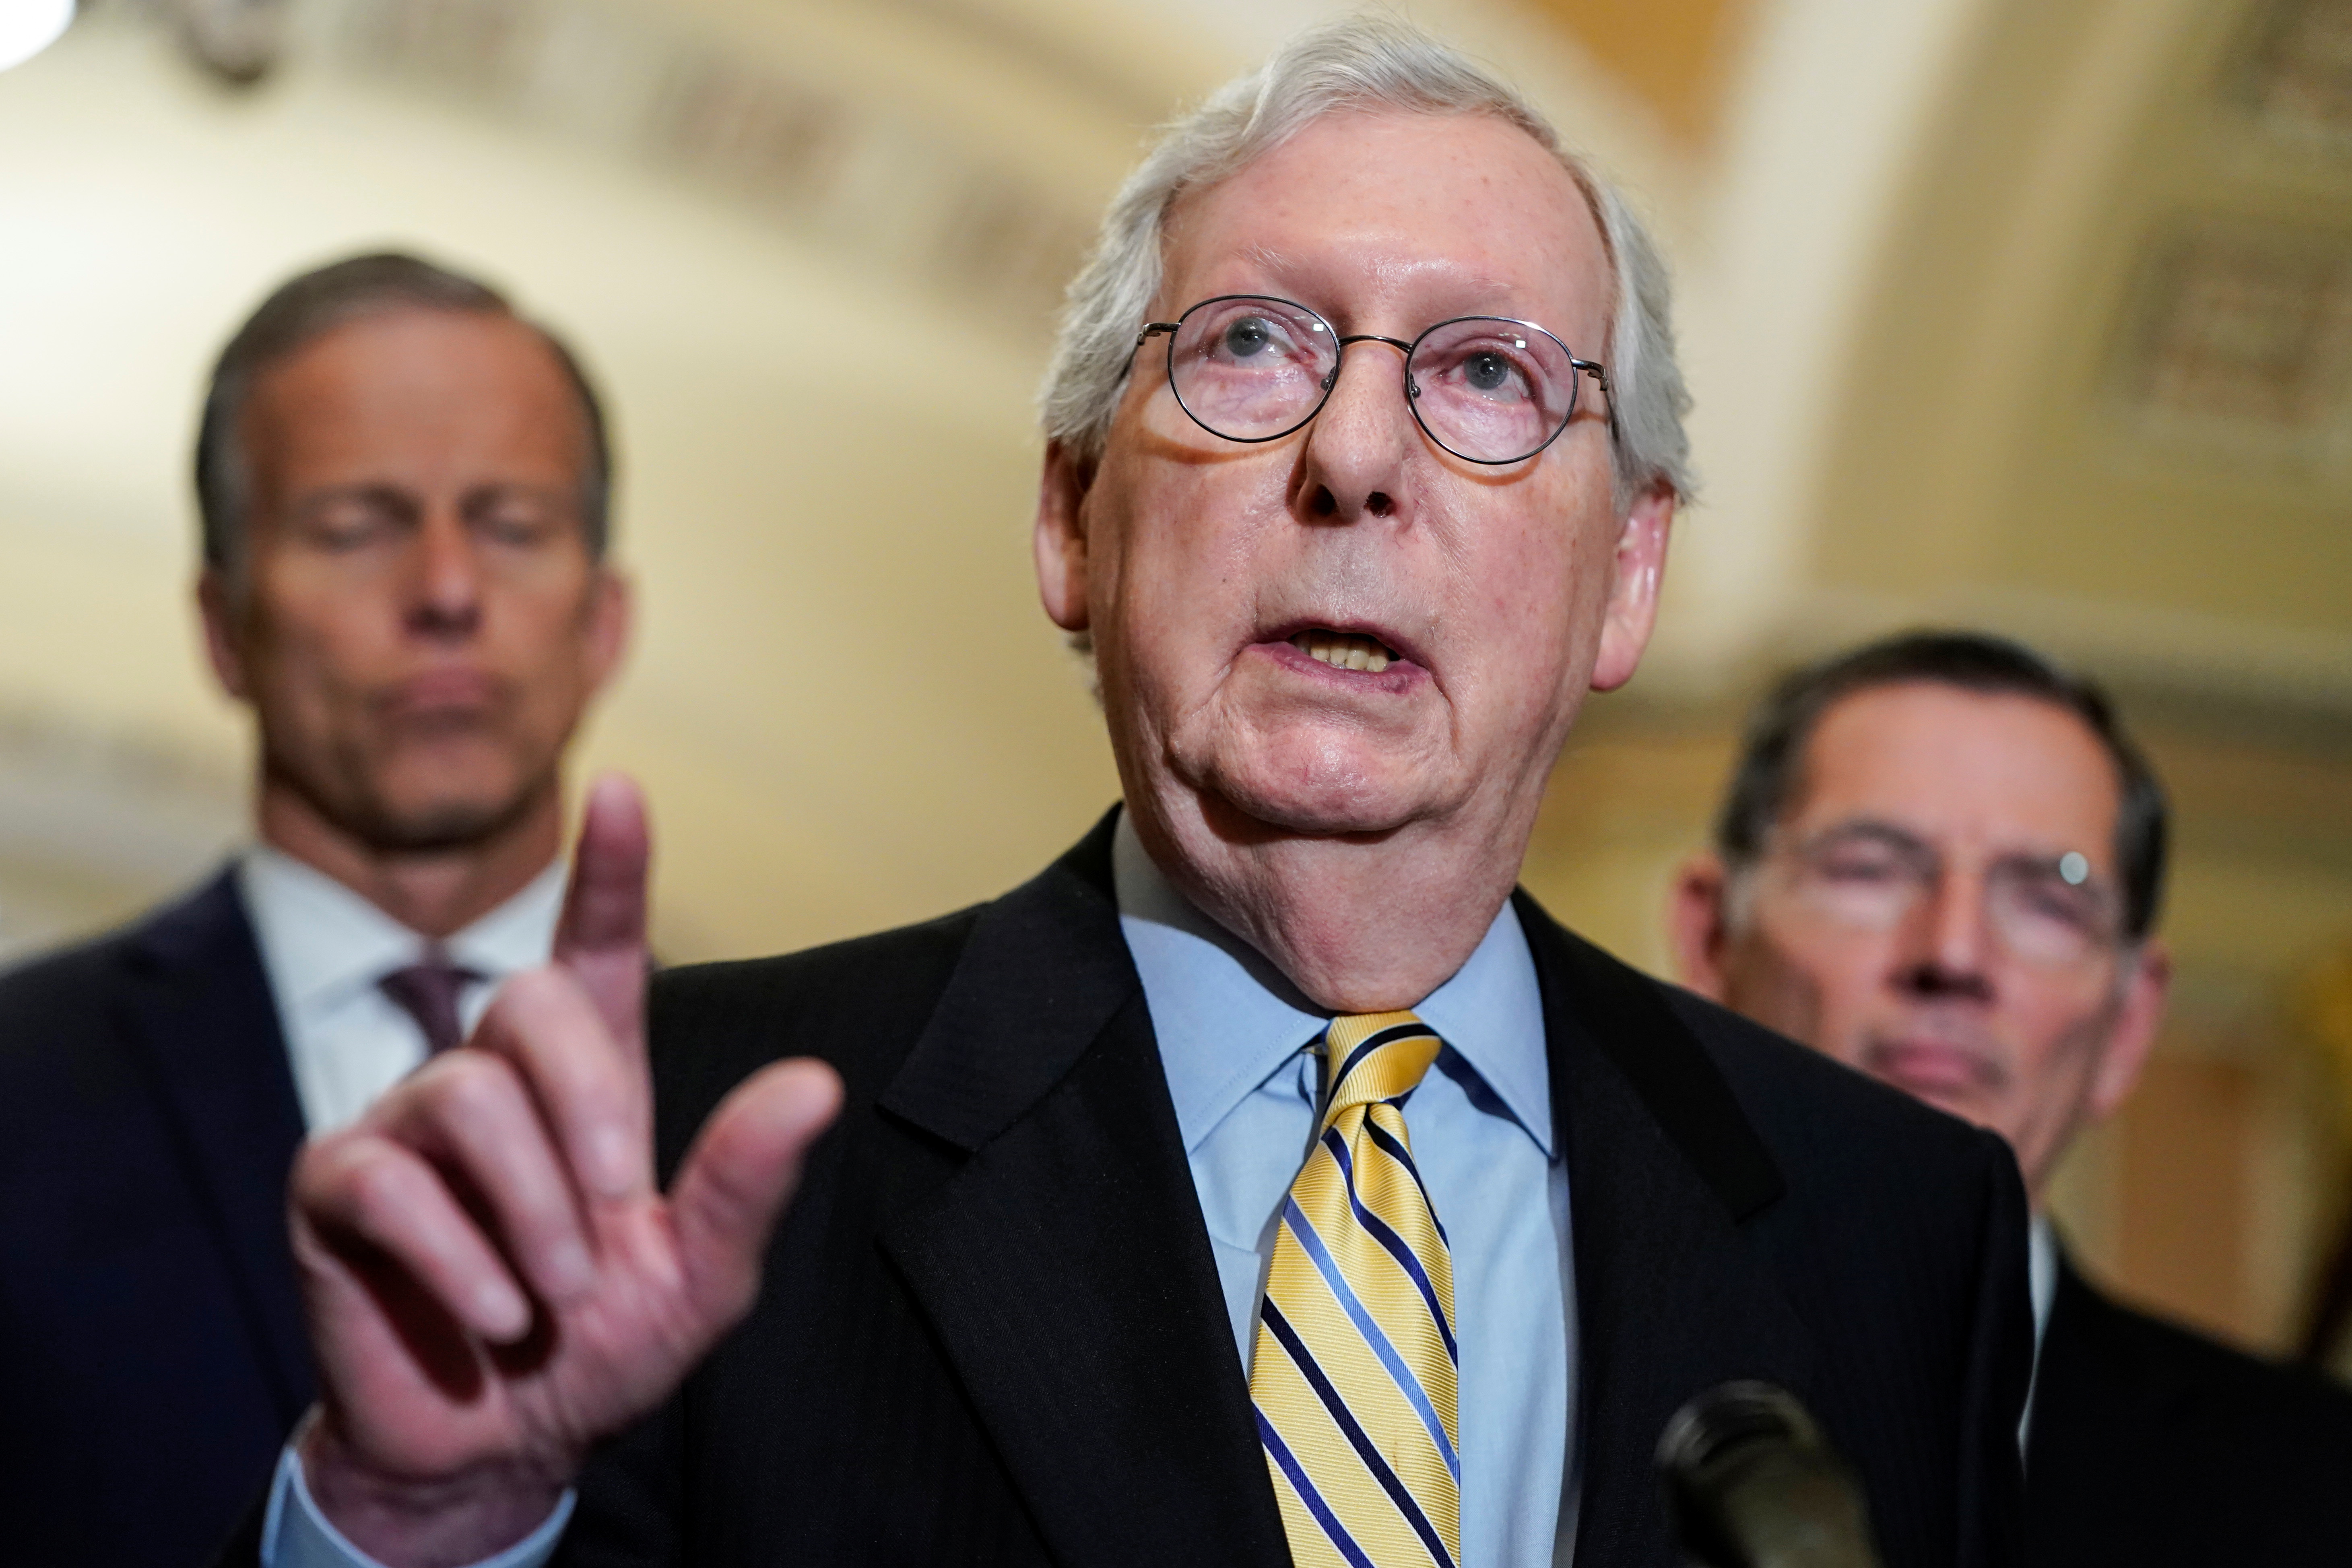 Senate Minority Leader Mitch McConnell (R-KY) speaks to the media in Washington